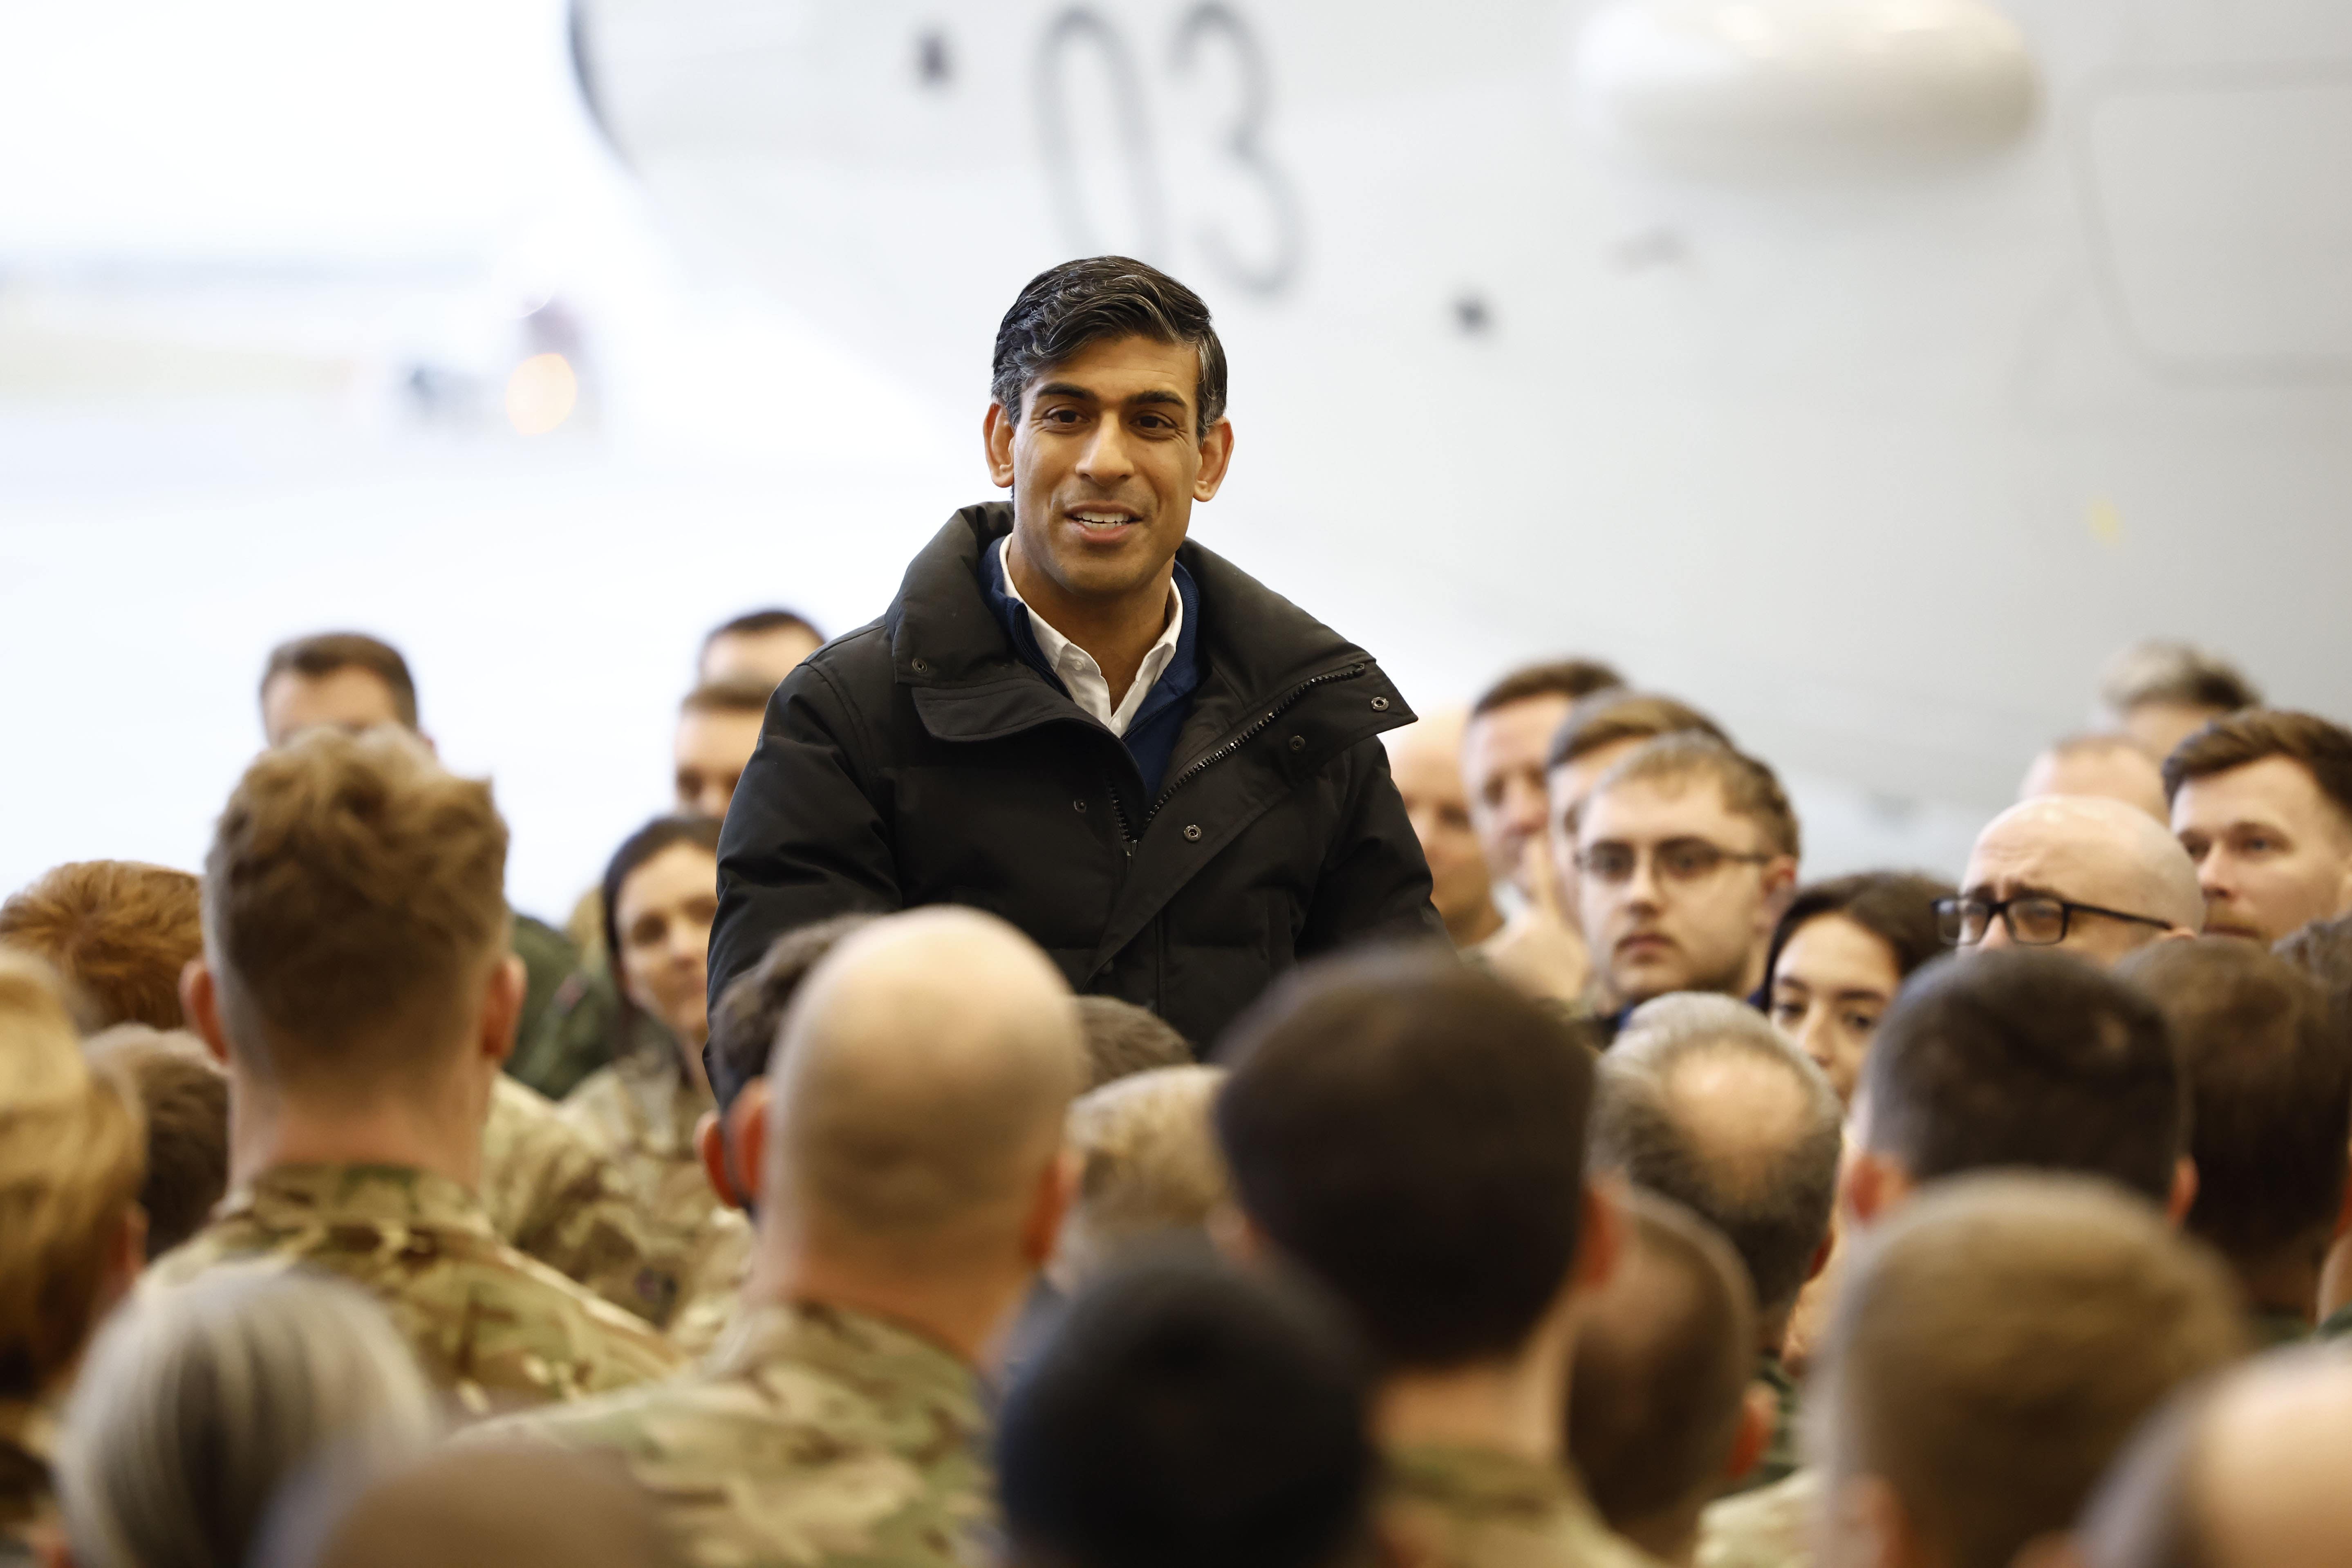 Rishi Sunak proposed the introduction of national service for 18-year-olds